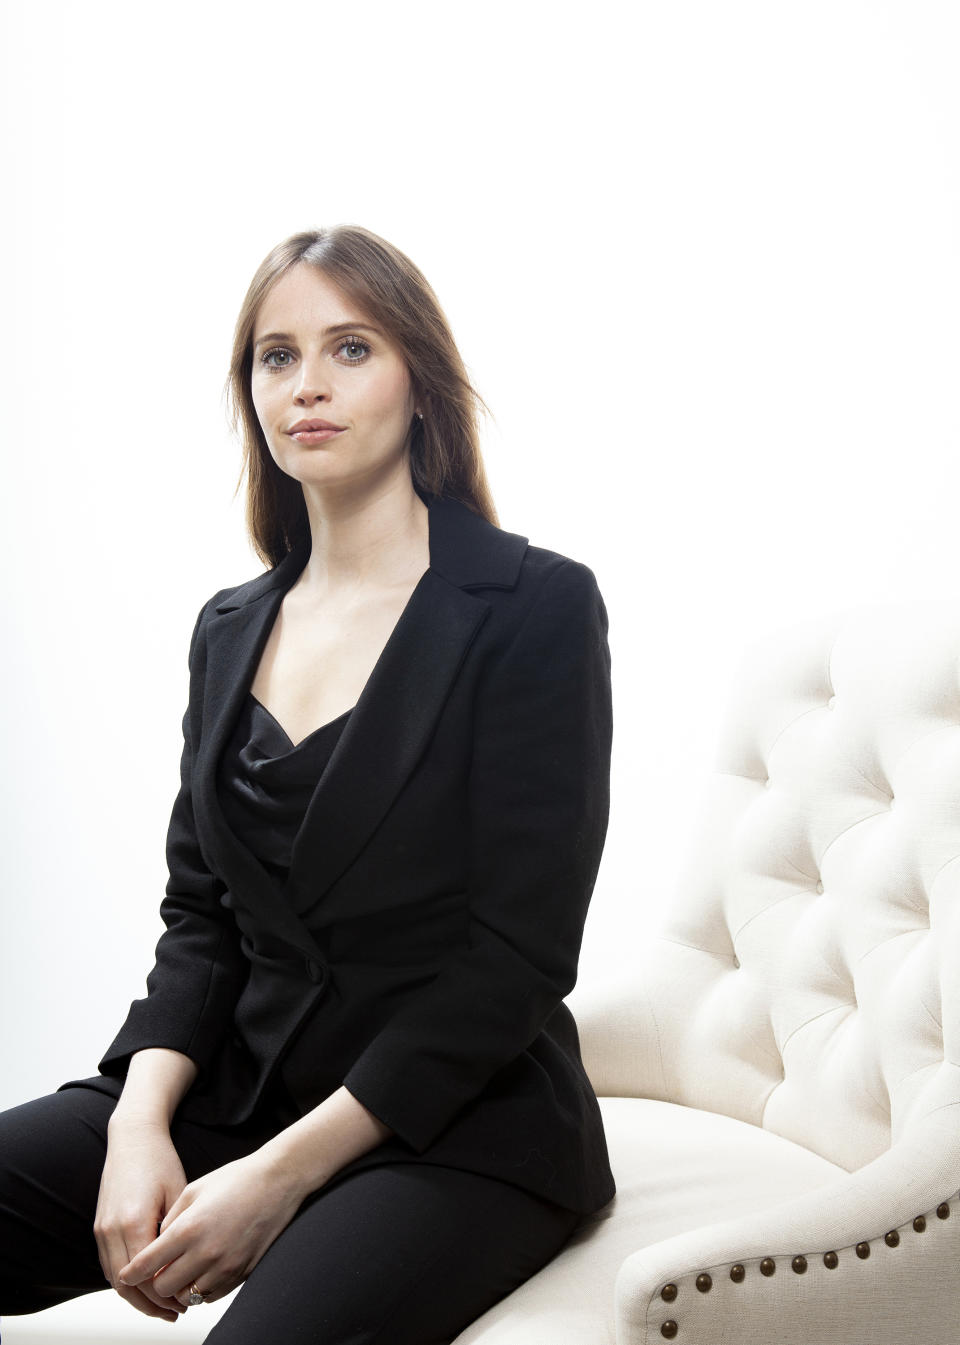 In this dec. 8, 2018 photo, actress Felicity Jones poses for a portrait on Dec 8, 2018 at the Four Seasons Hotel in Los Angeles to promote her film "On the Basis of Sex". (Photo by Rebecca Cabage/Invision/AP)